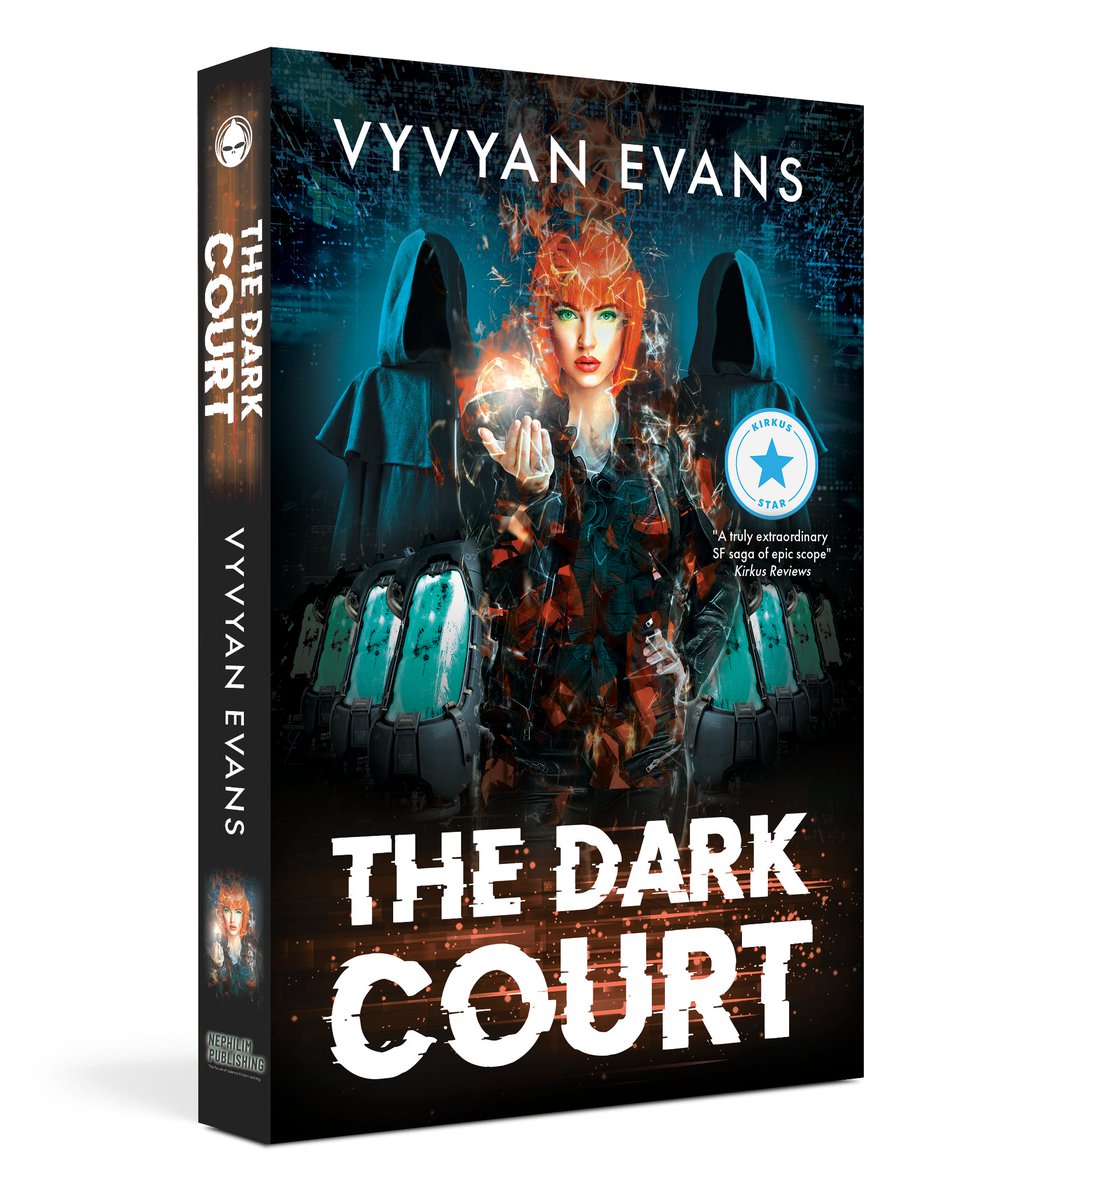 Read the starred review for The Dark Court in @KirkusReviews 👇

'Evans masterfully twists together multiple storylines with ease. The pacing is relentless throughout, as is the action, with jaw-dropping set-pieces'

kirkusreviews.com/book-reviews/v…

#bookreviews #scifibooks #books #scifi